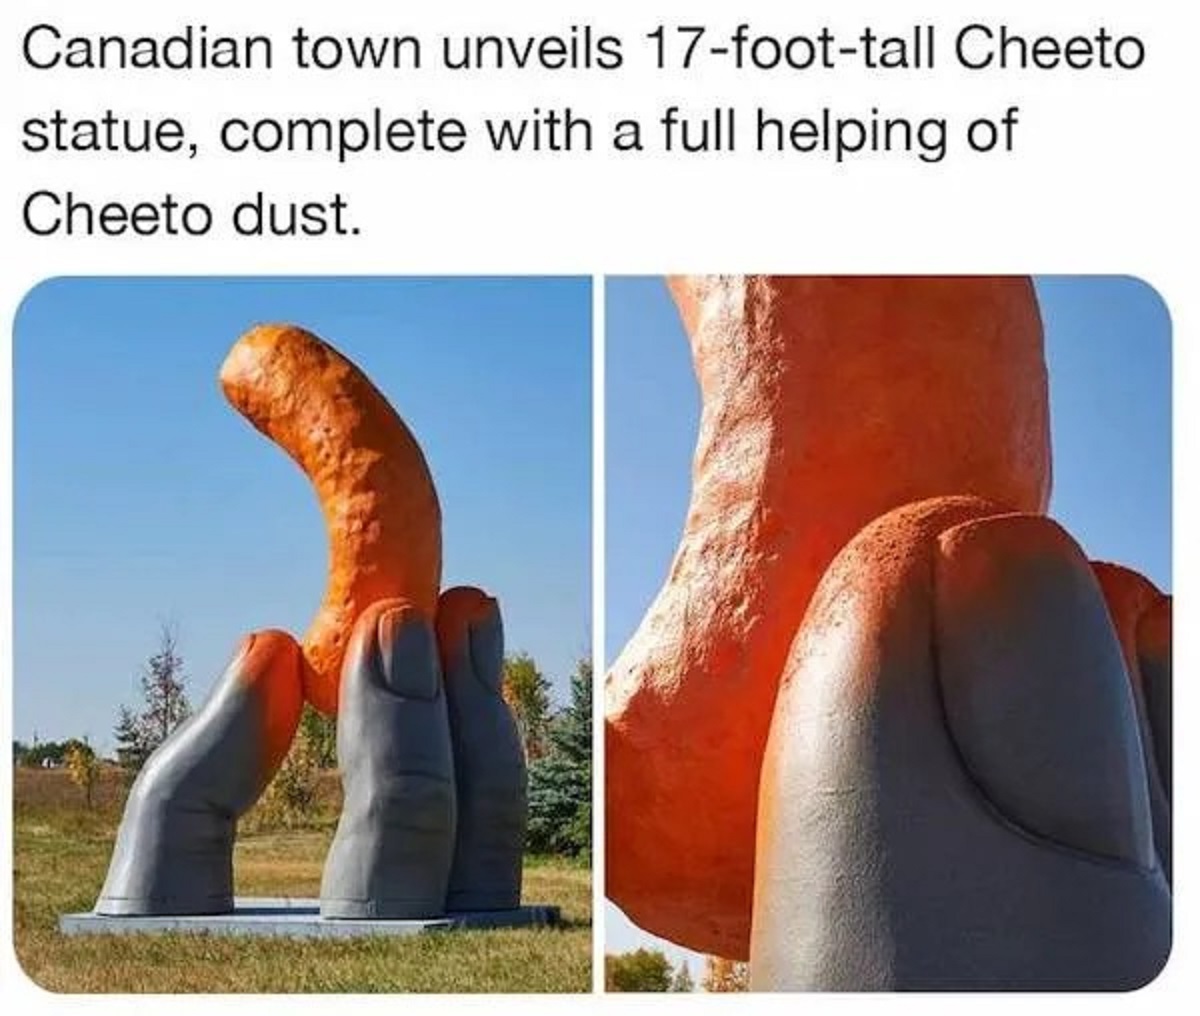 statue cheetos - Canadian town unveils 17foottall Cheeto statue, complete with a full helping of Cheeto dust.